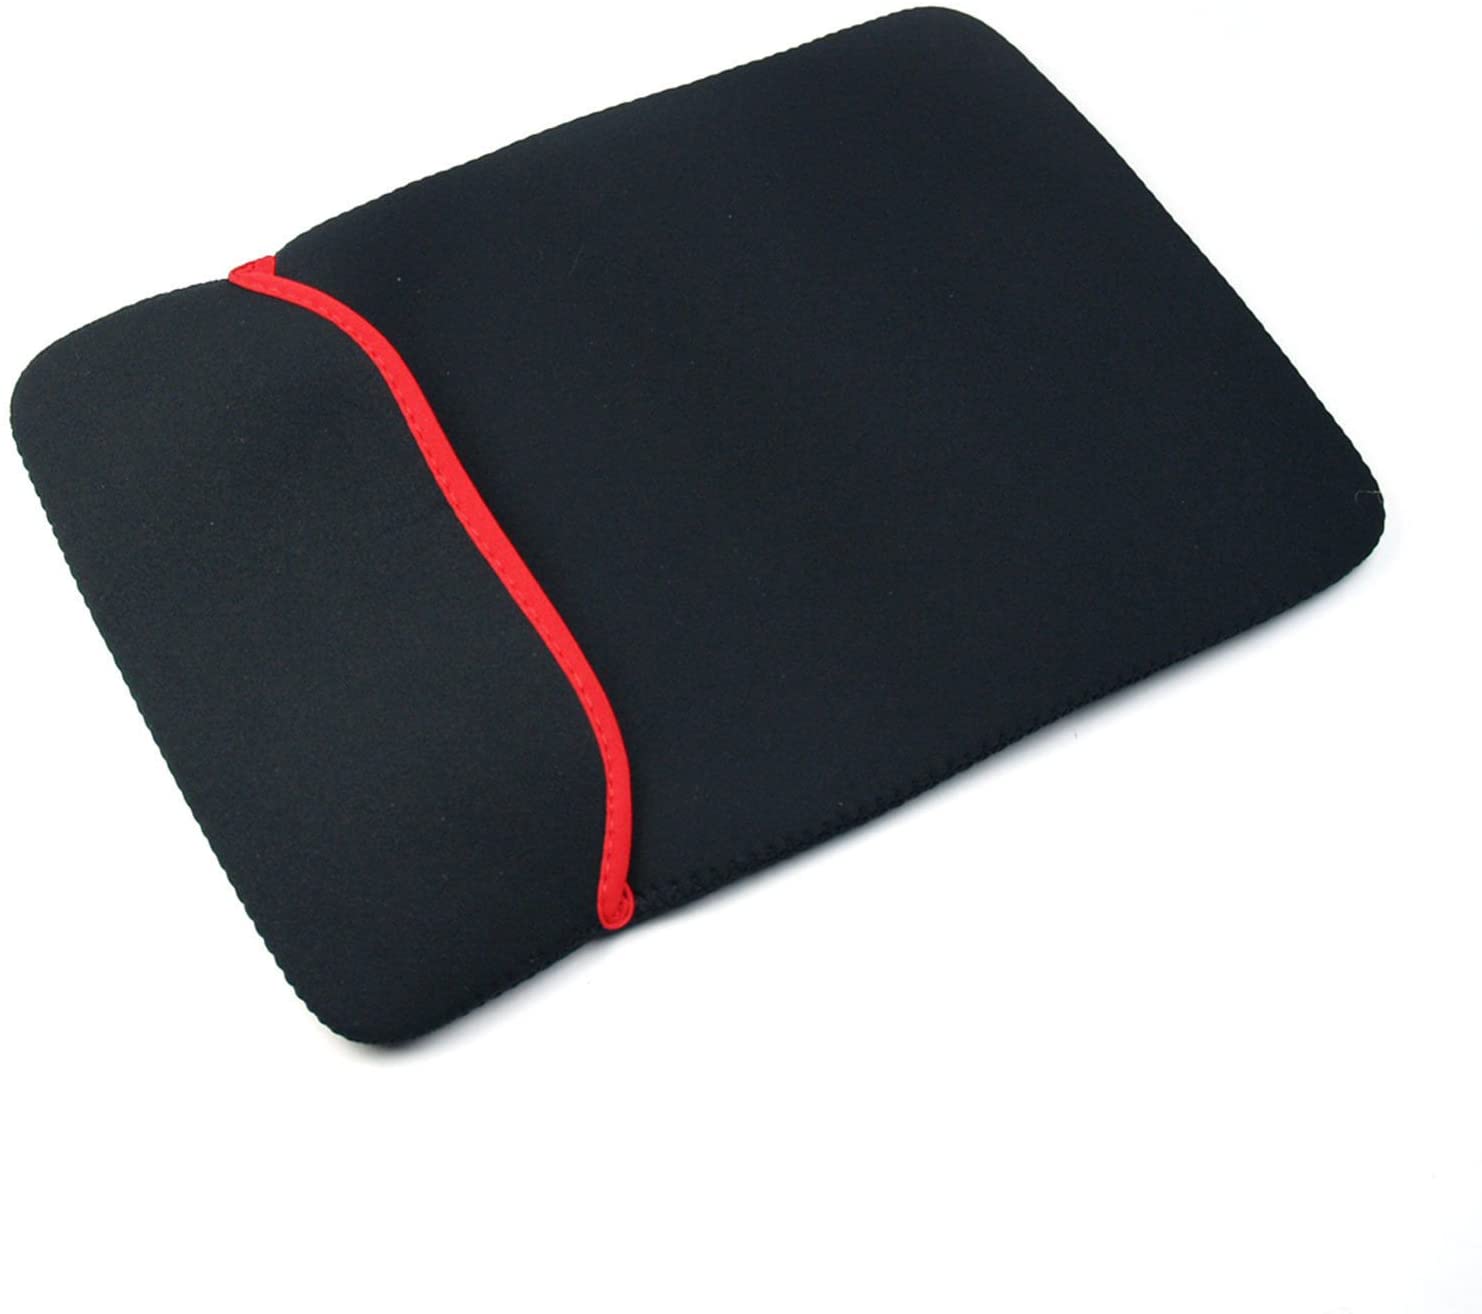 13 inch Laptop Sleeve Red Line – Black - Sleeve - 13 inch sleeve - Black sleeve - Laptop 13 inch sleeve